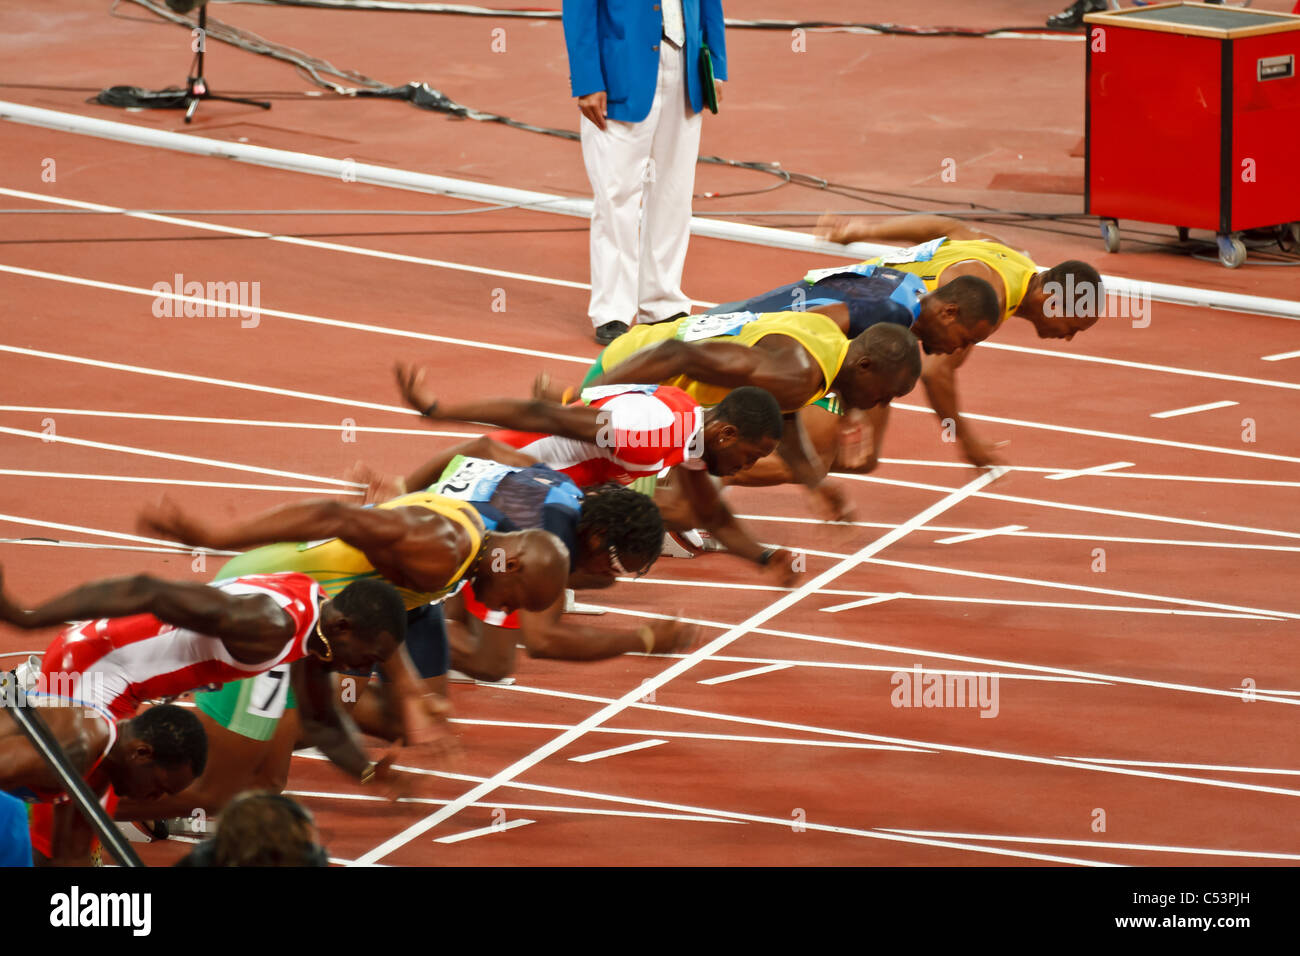 Start Of Men S 100 Meter Sprint Race Where Usain Bolt Sets A New World Record At The 2008 Olympic Aug 18 2008 Beijing China Stock Photo Alamy